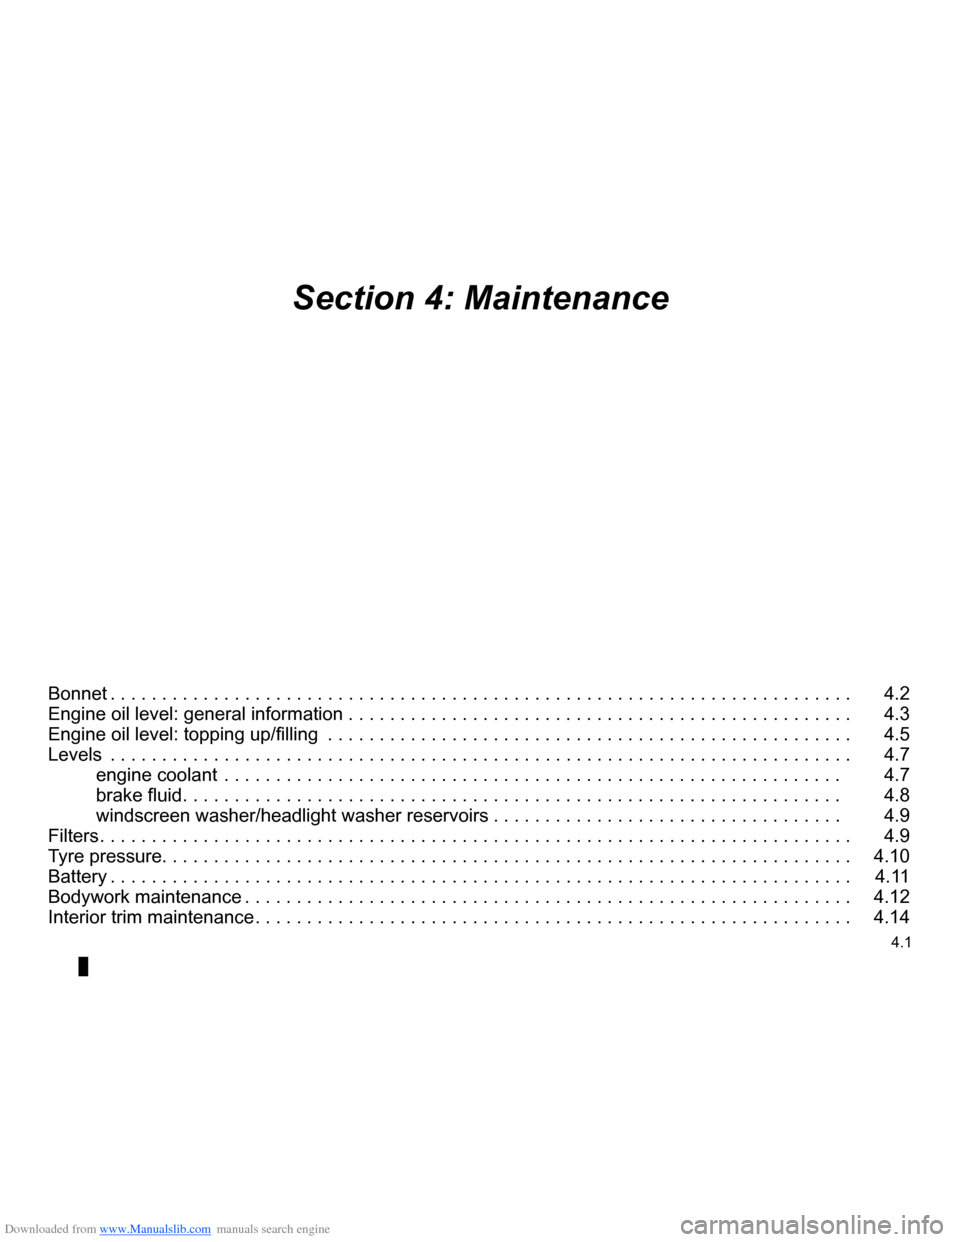 RENAULT CLIO 2009 X85 / 3.G Owners Manual Downloaded from www.Manualslib.com manuals search engine 
4.1
ENG_UD14668_4Sommaire 4 (X85 - B85 - C85 - S85 - K85 - Renault)ENG_NU_853-3_BCSK85_Renault_4
Section 4: Maintenance
Bonnet . . . . . . . .